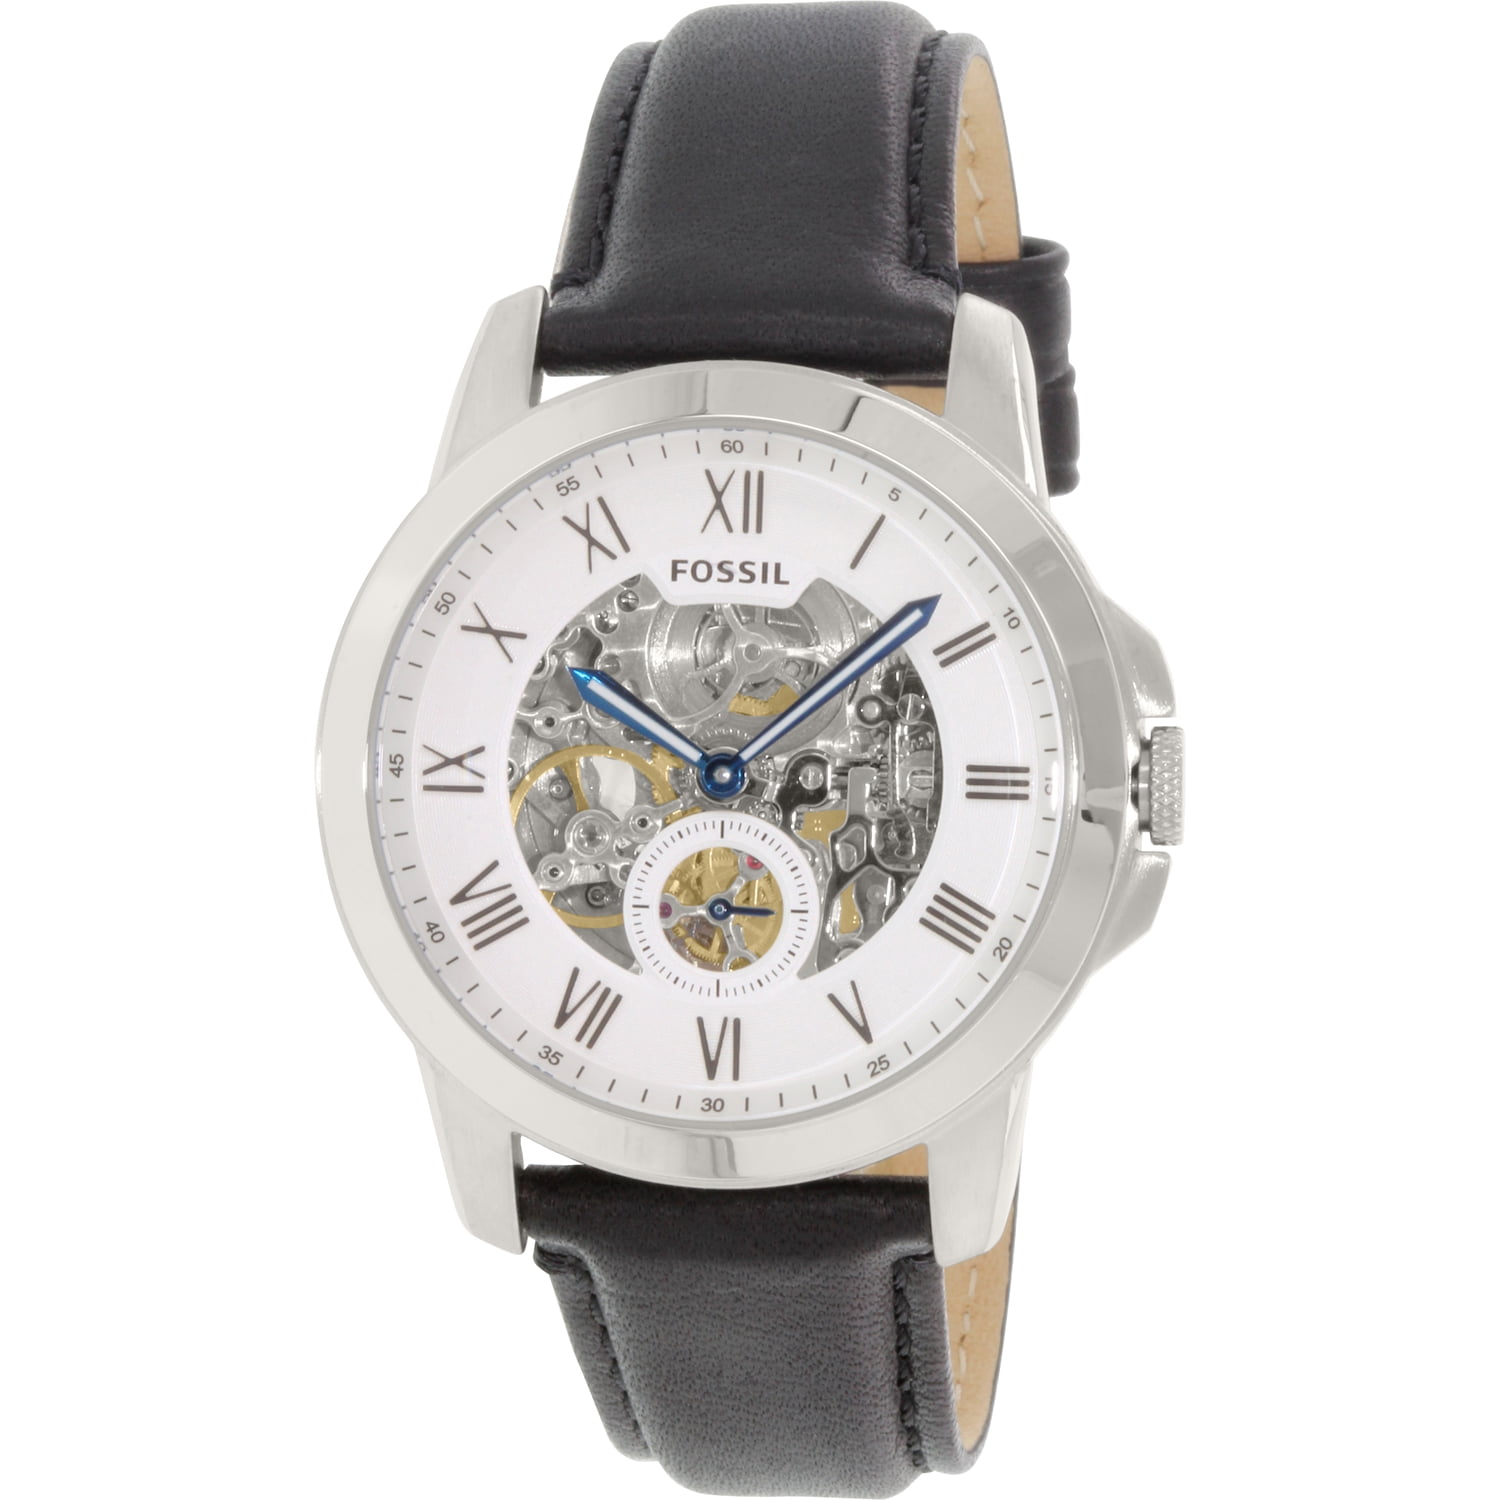 Fossil - Fossil Men's Grant Automatic Leather Watch, ME3053 - Walmart ...